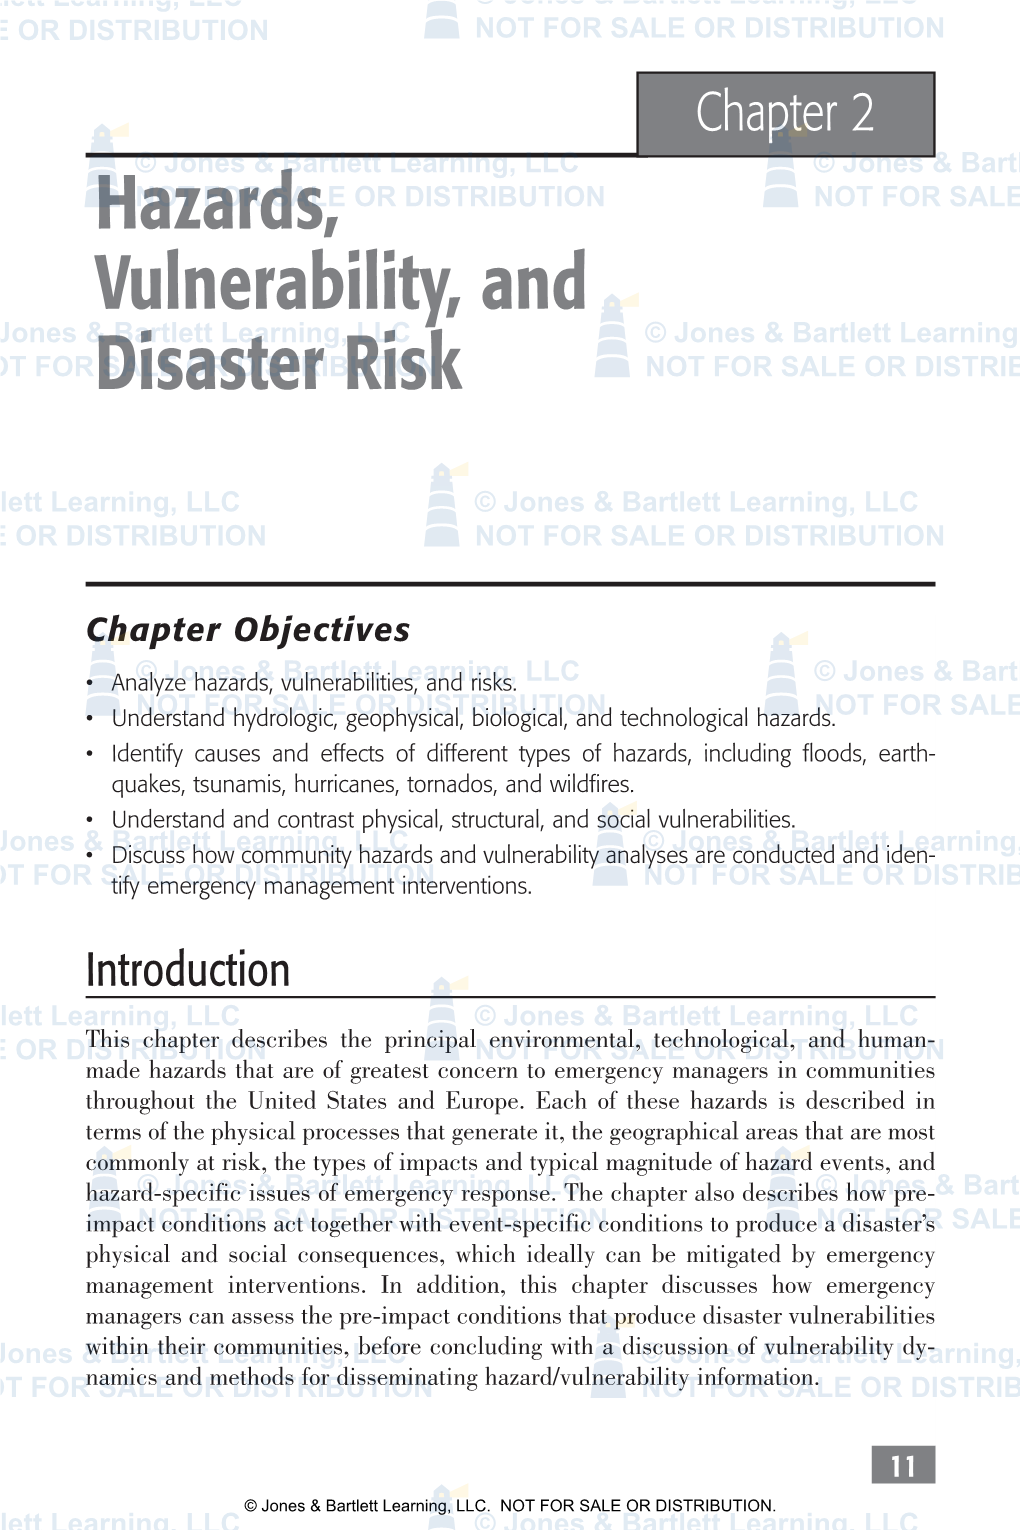 Hazards, Vulnerability, and Disaster Risk Principal Hazards in the United States and Europe